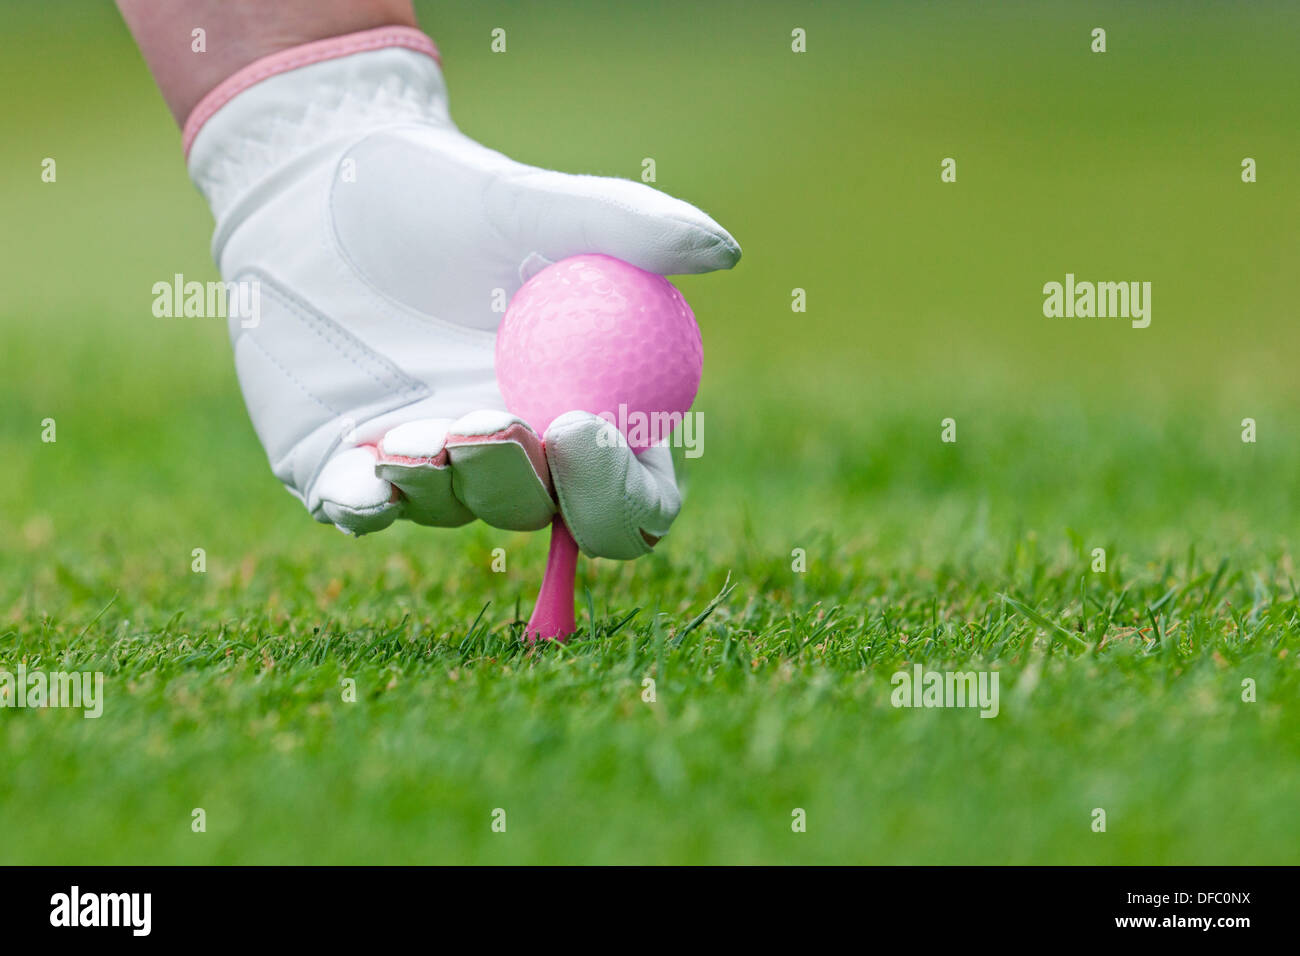 A ladies hand in white leather glove holding a pink golf ball placing a tee into the ground. Stock Photo